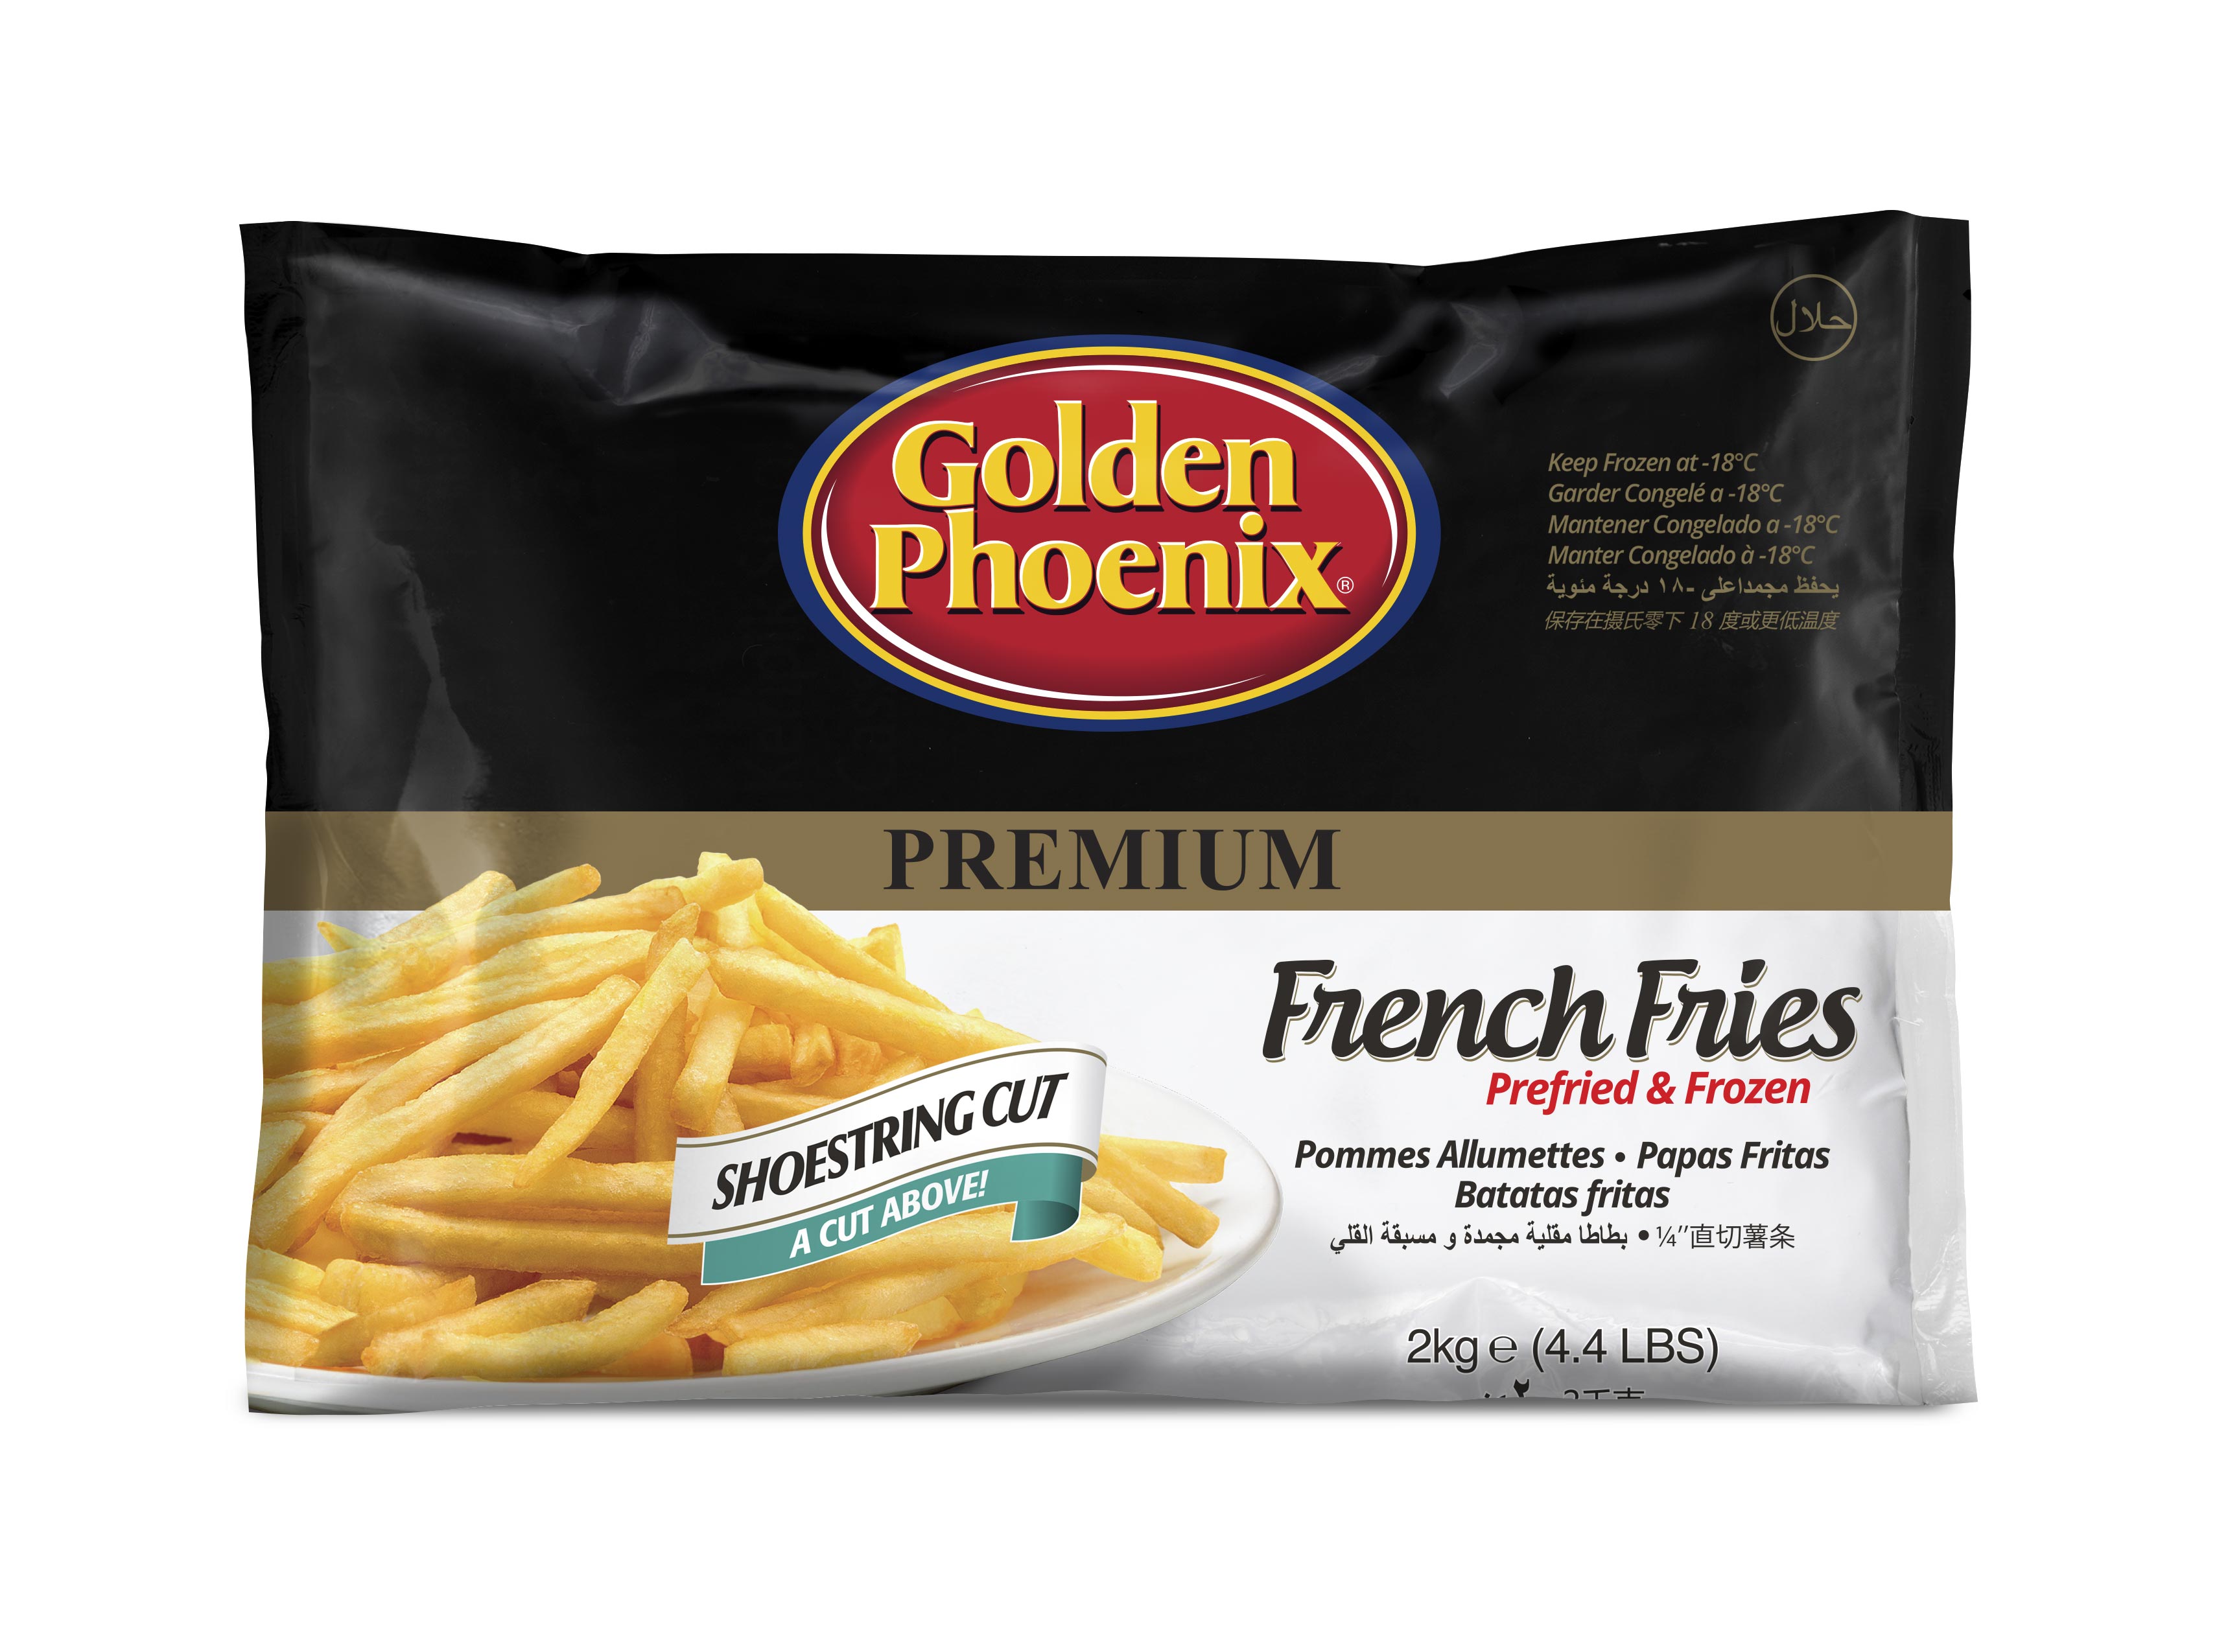 Premium Shoestring Cut French Fries